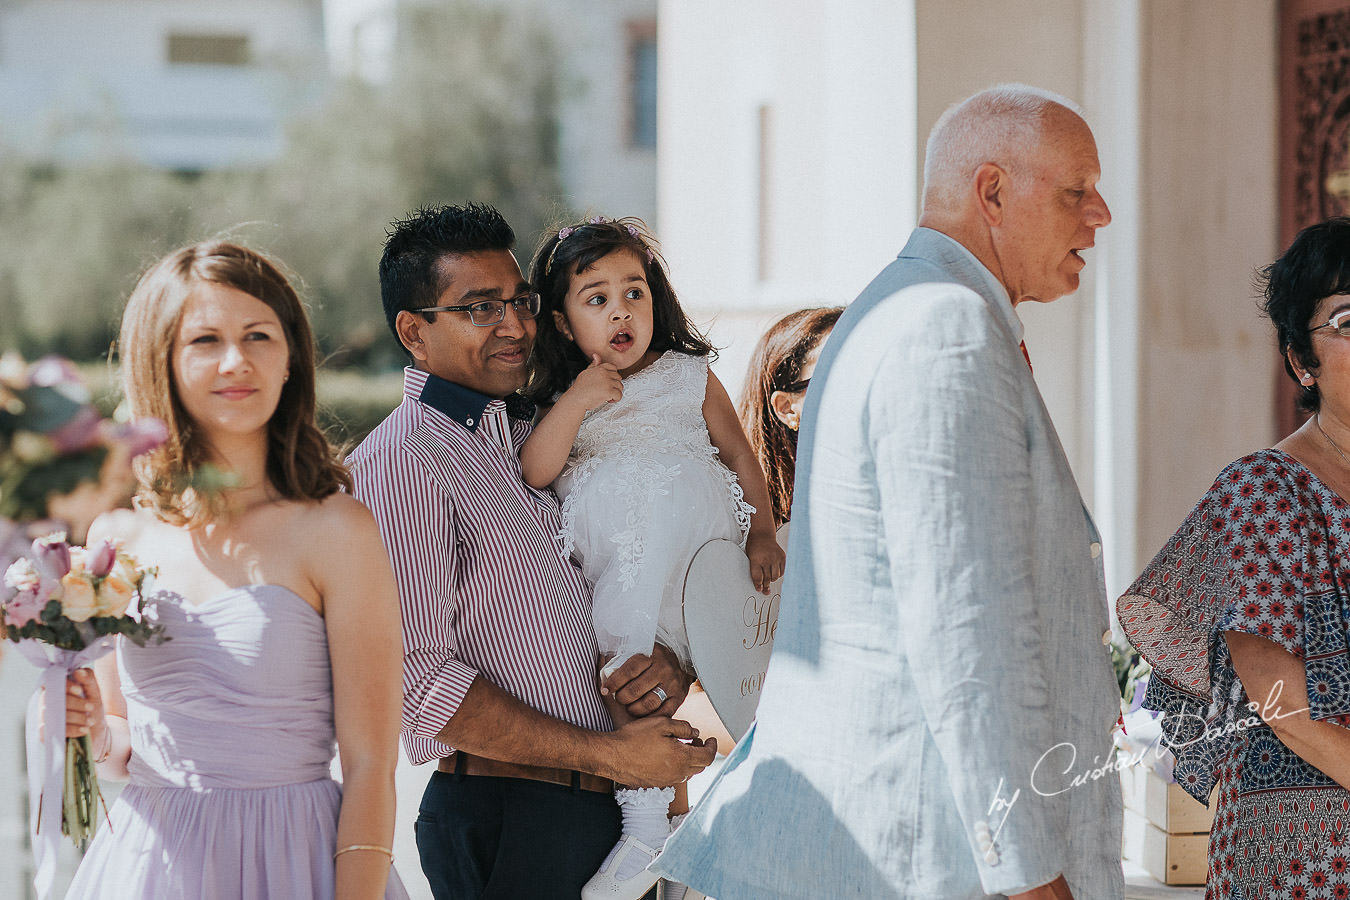 Moments captured during a beautiful wedding at St. Raphael Resort in Limassol, Cyprus.